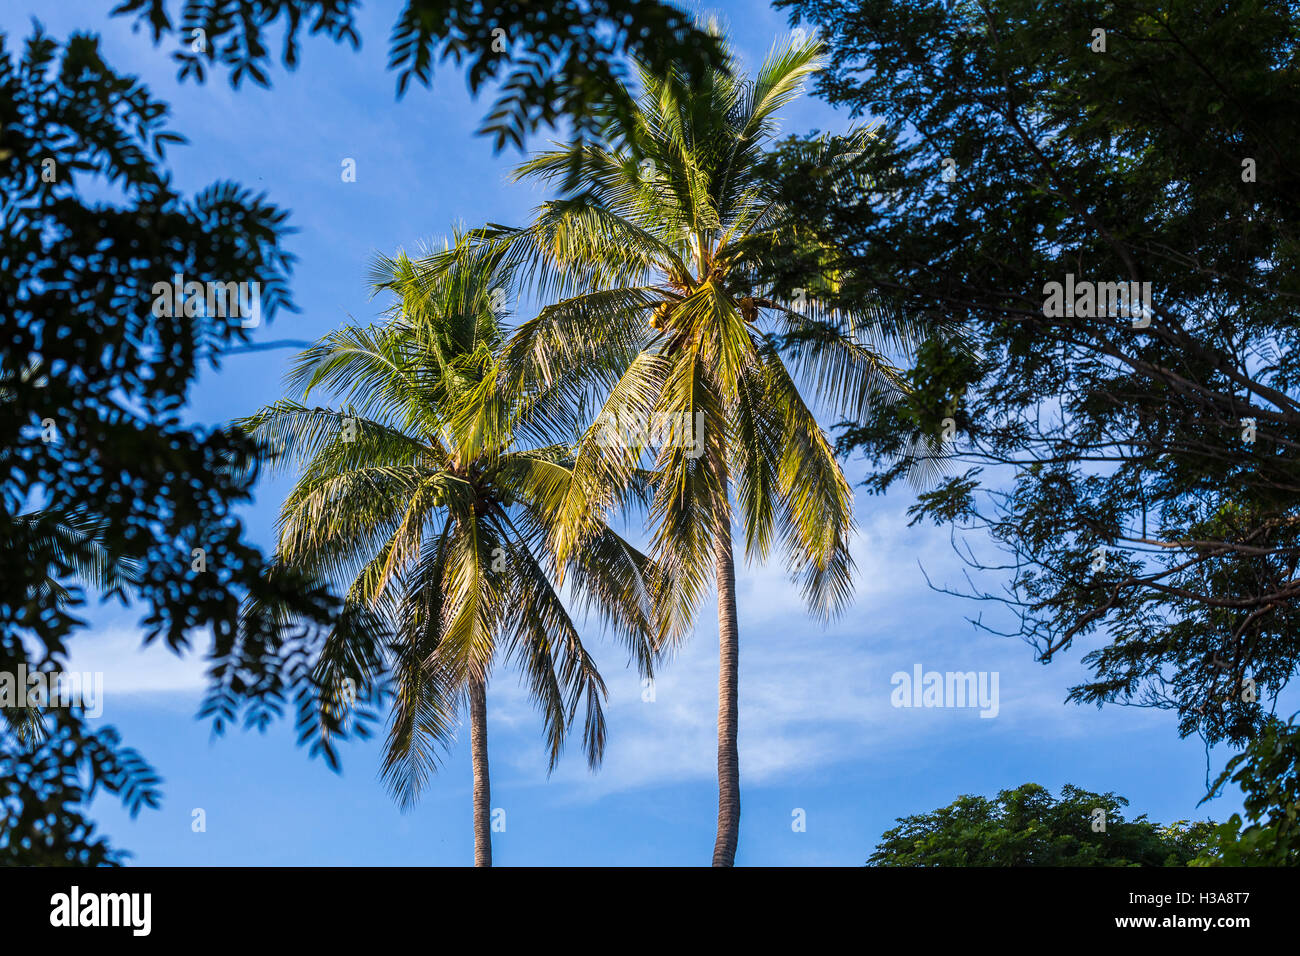 Palm trees on the beach seen through the trees of a dry forest in Costa Rica. Stock Photo